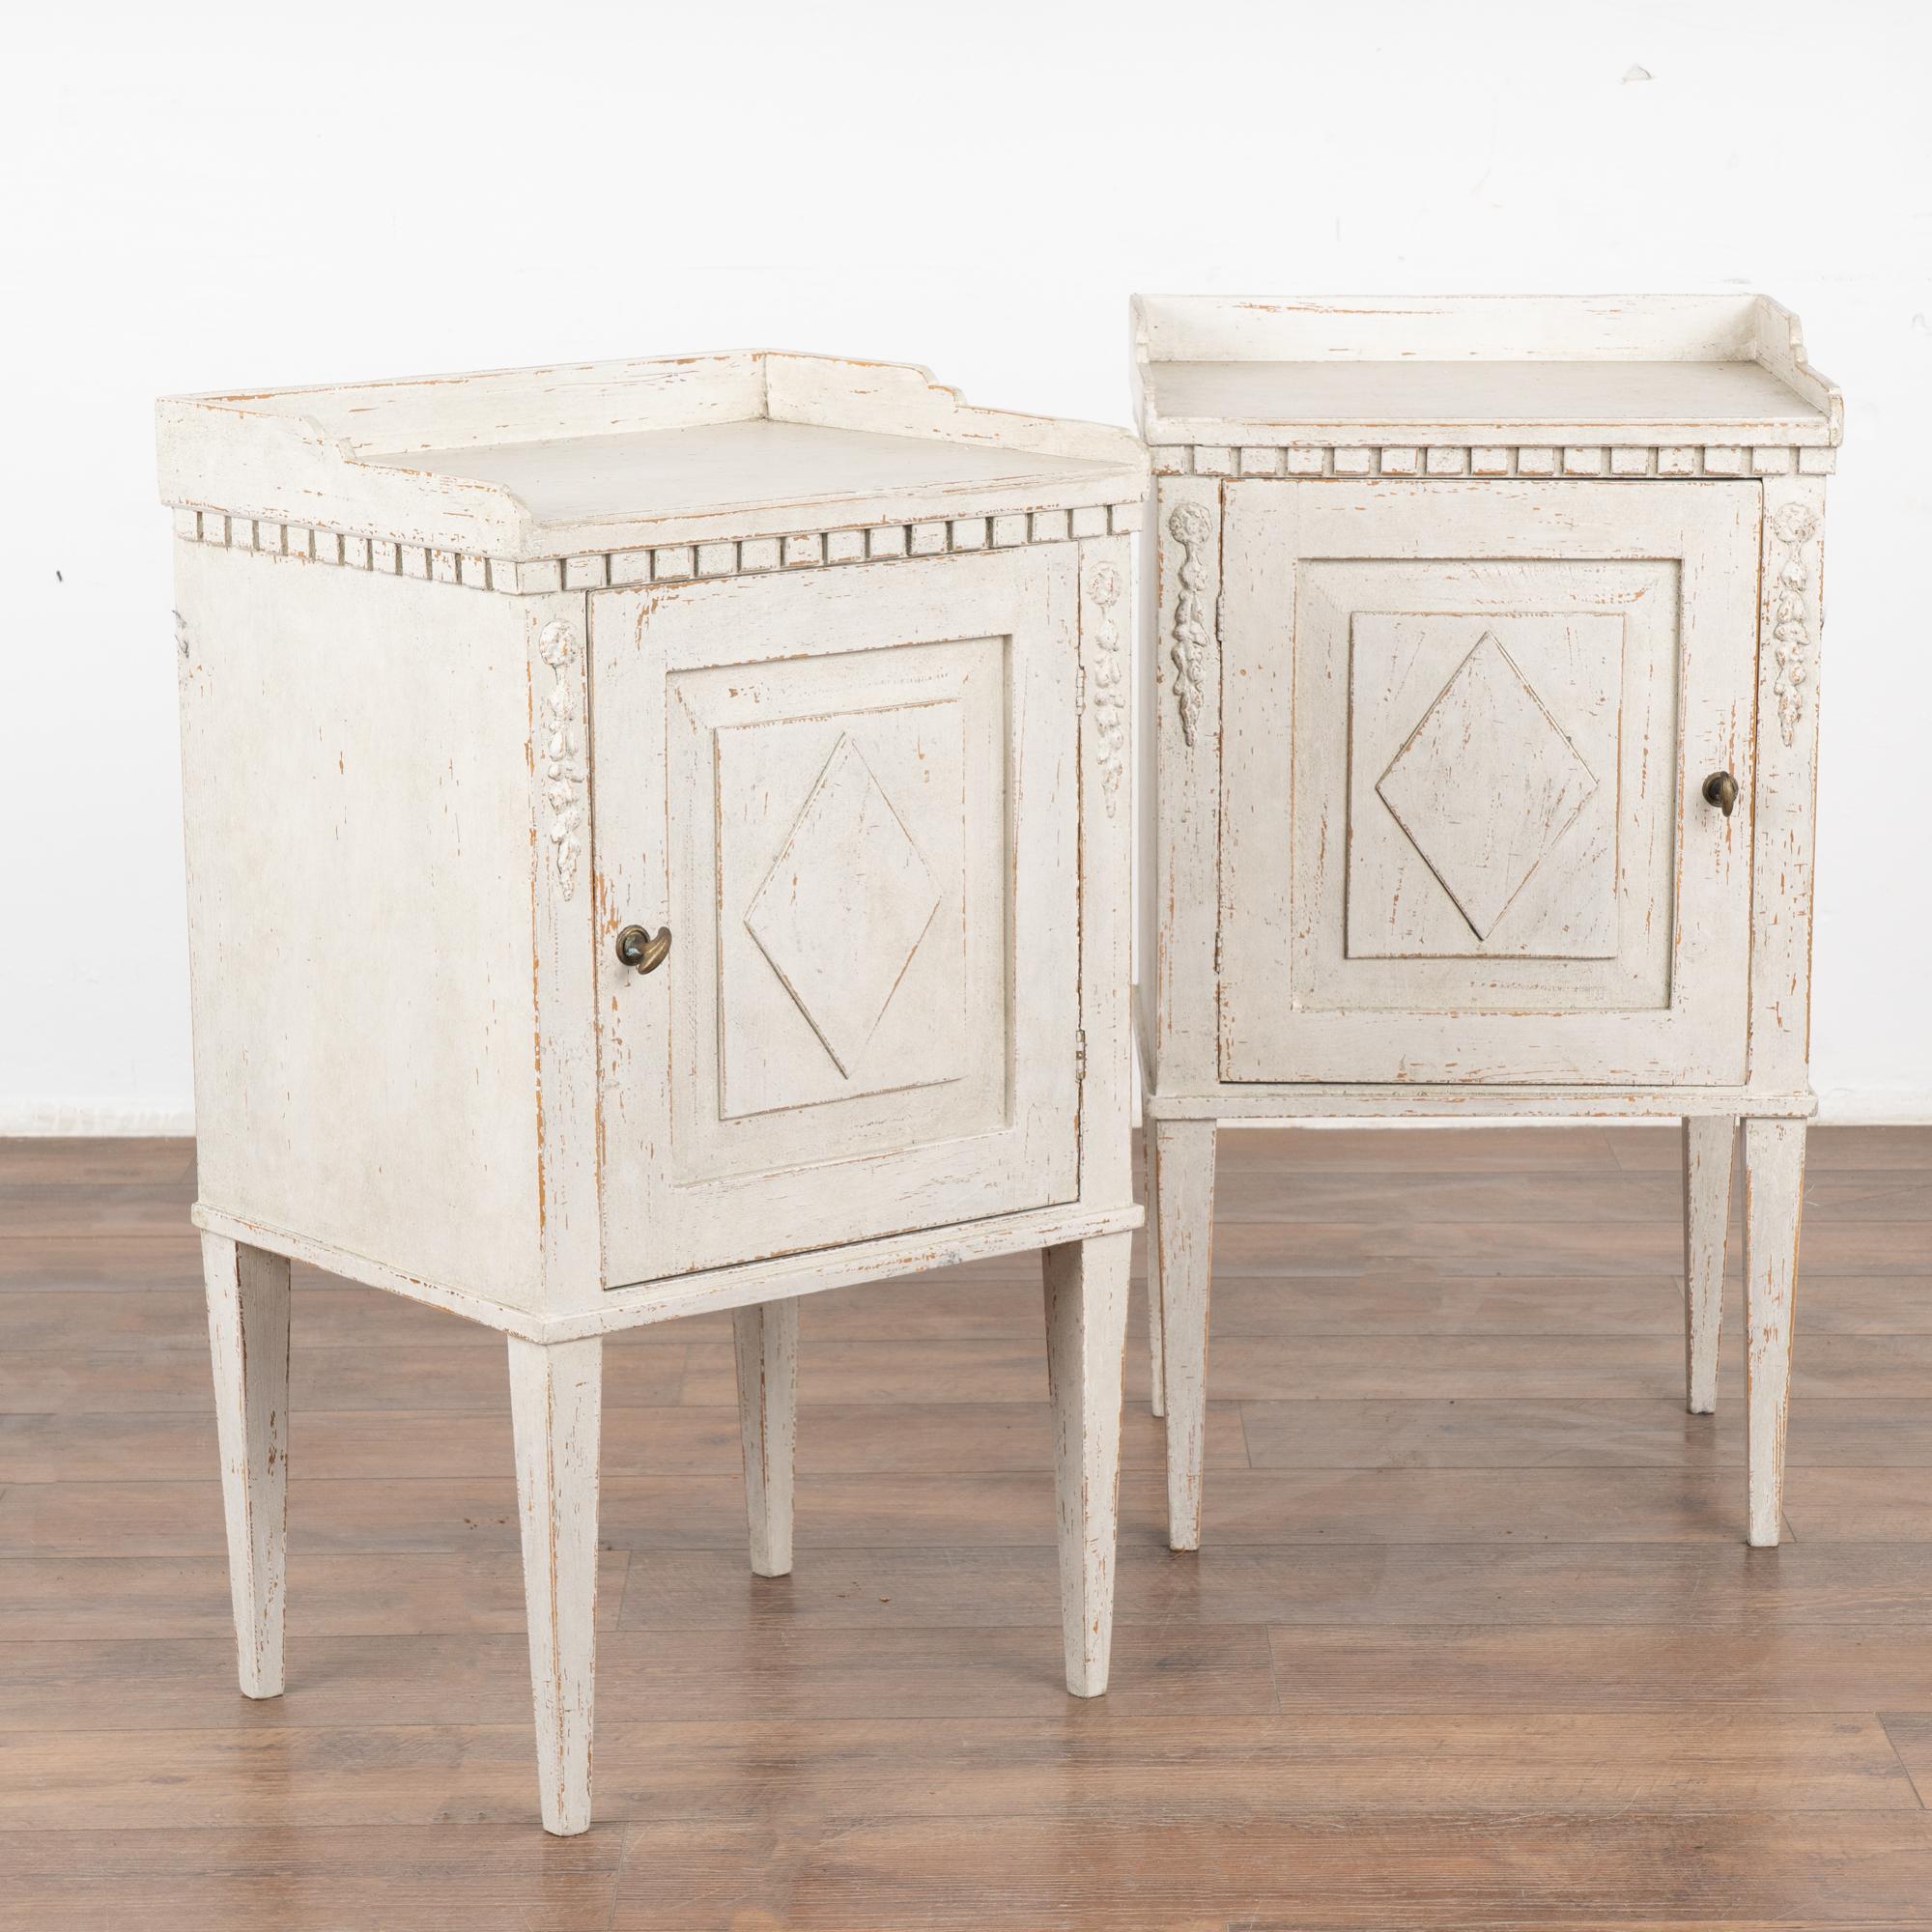 Pair, small Swedish country Gustavian white painted nightstands or side tables standing on tapered legs.
Applied floral carving accents the front along with dentil molding and diamond on panel door which opens with brass knob.
Professionally applied